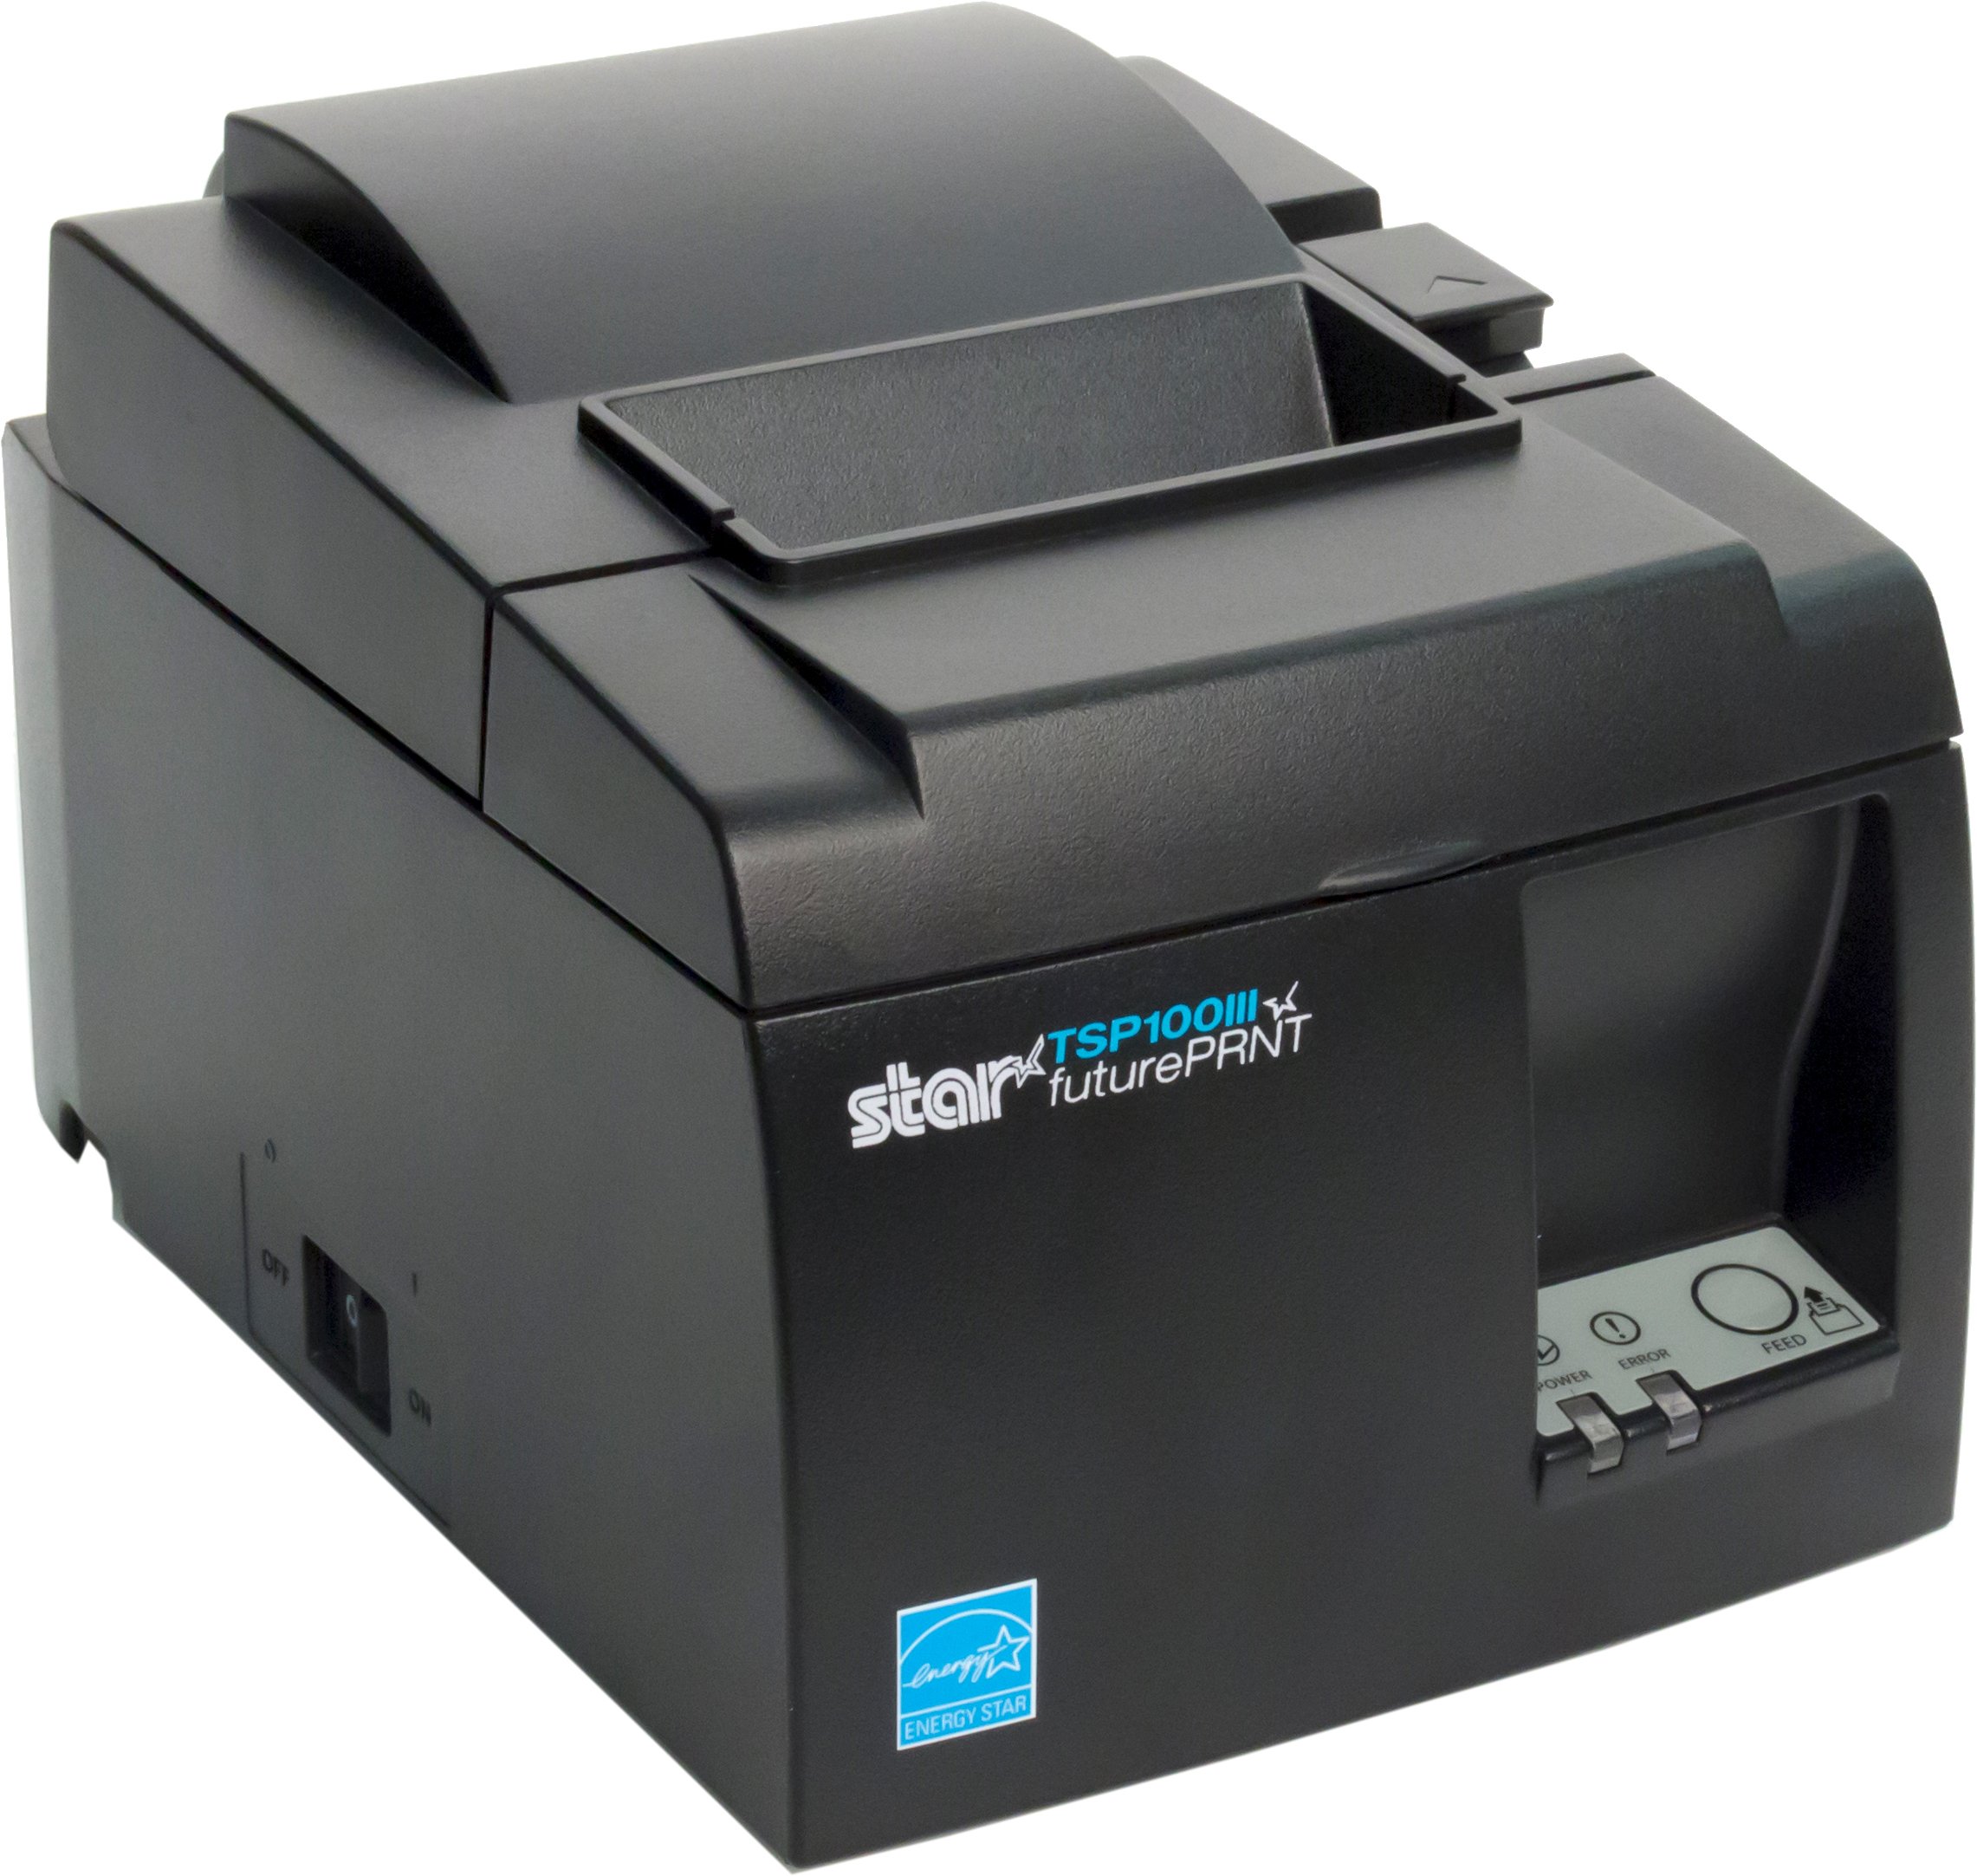 Star Micronics TSP143IIIU USB Thermal Receipt Printer with Device and Mfi USB Ports, Auto-cutter, and Internal Power Supply - Gray